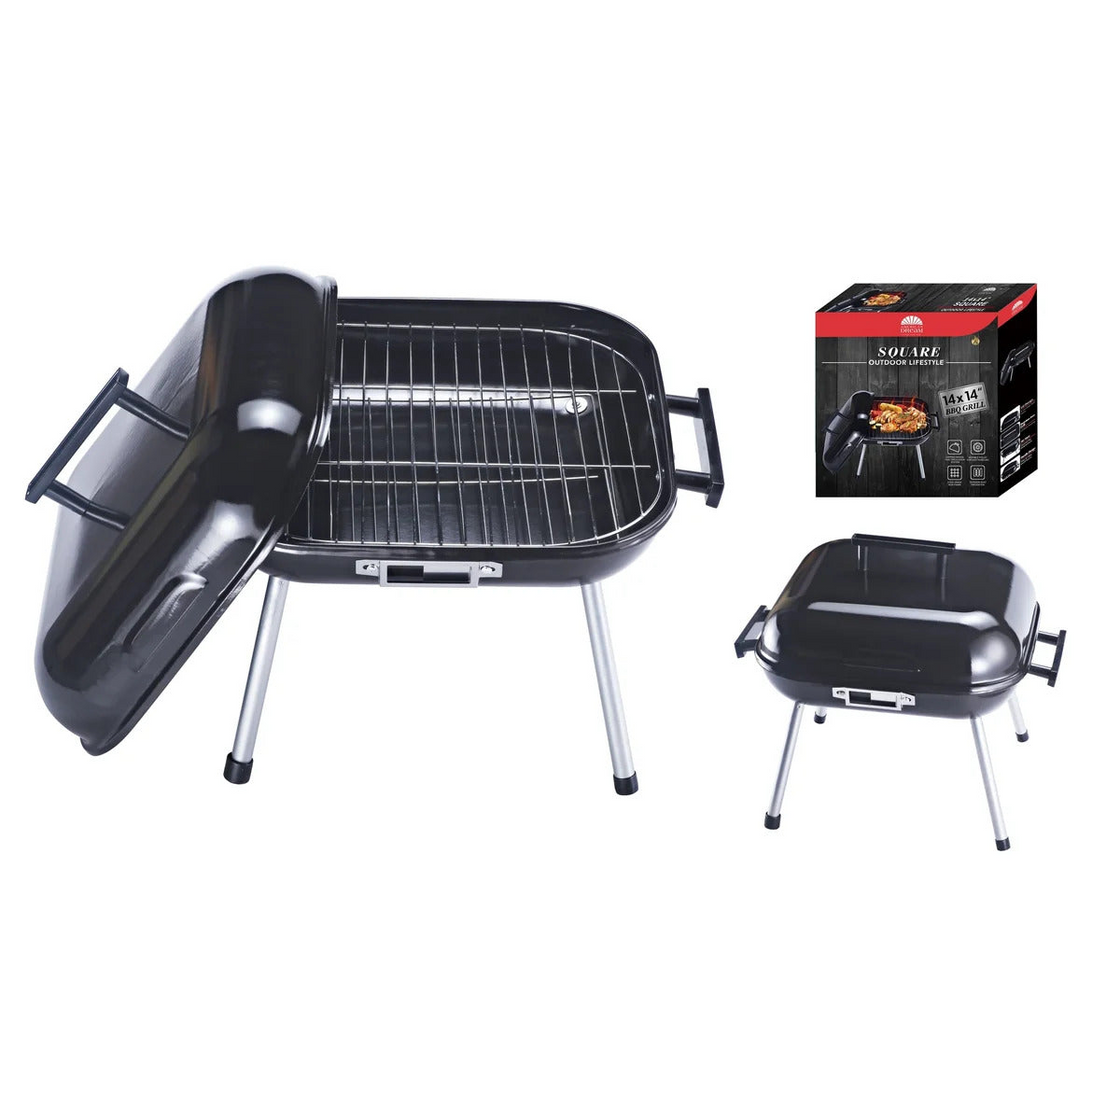 14-Inch Portable Charcoal Grill - Compact and Versatile BBQ Grill